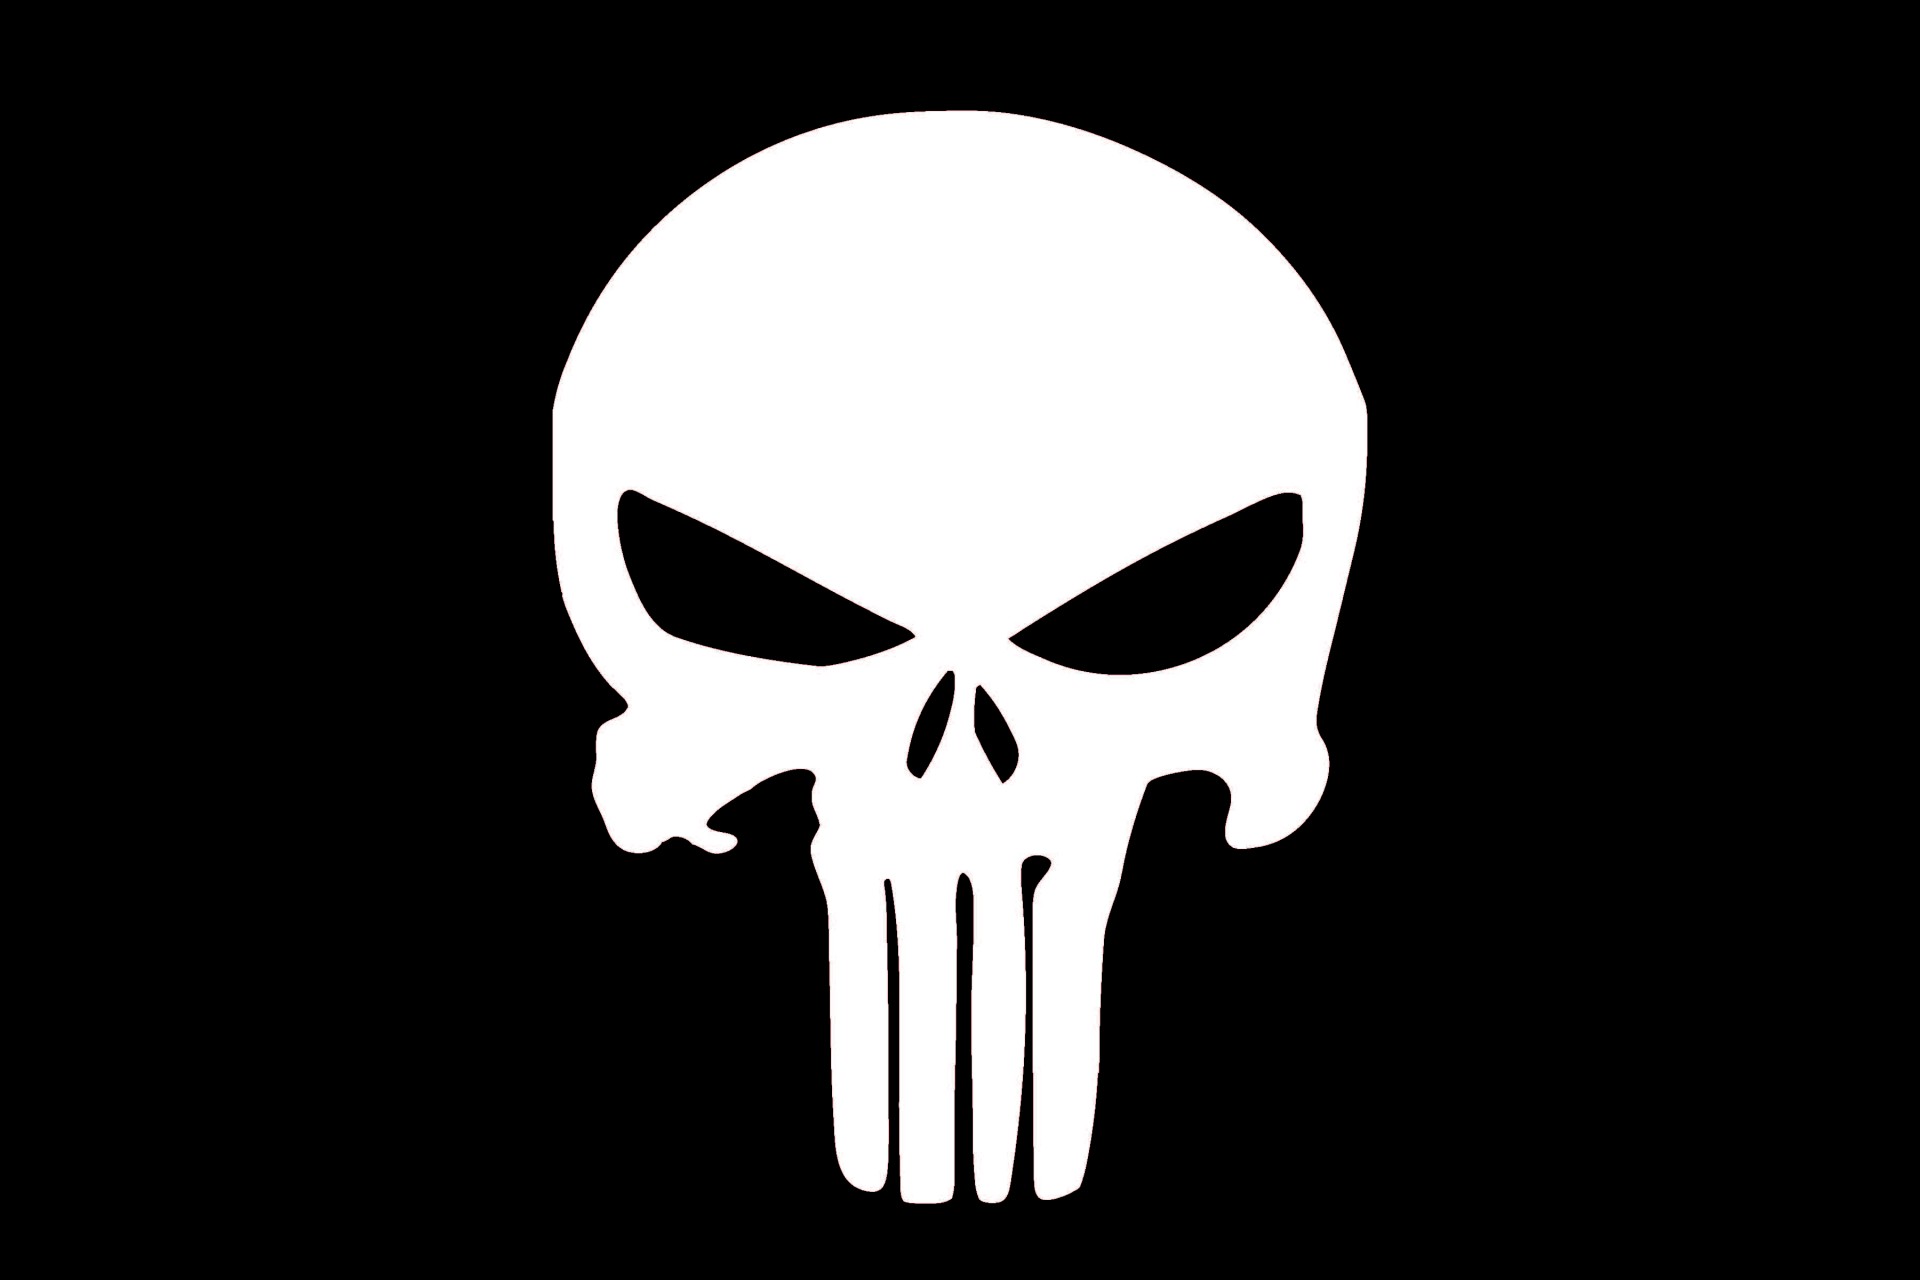 Geek insider, geekinsider, geekinsider. Com,, netflix marvels: an inside look at 'the punisher', entertainment